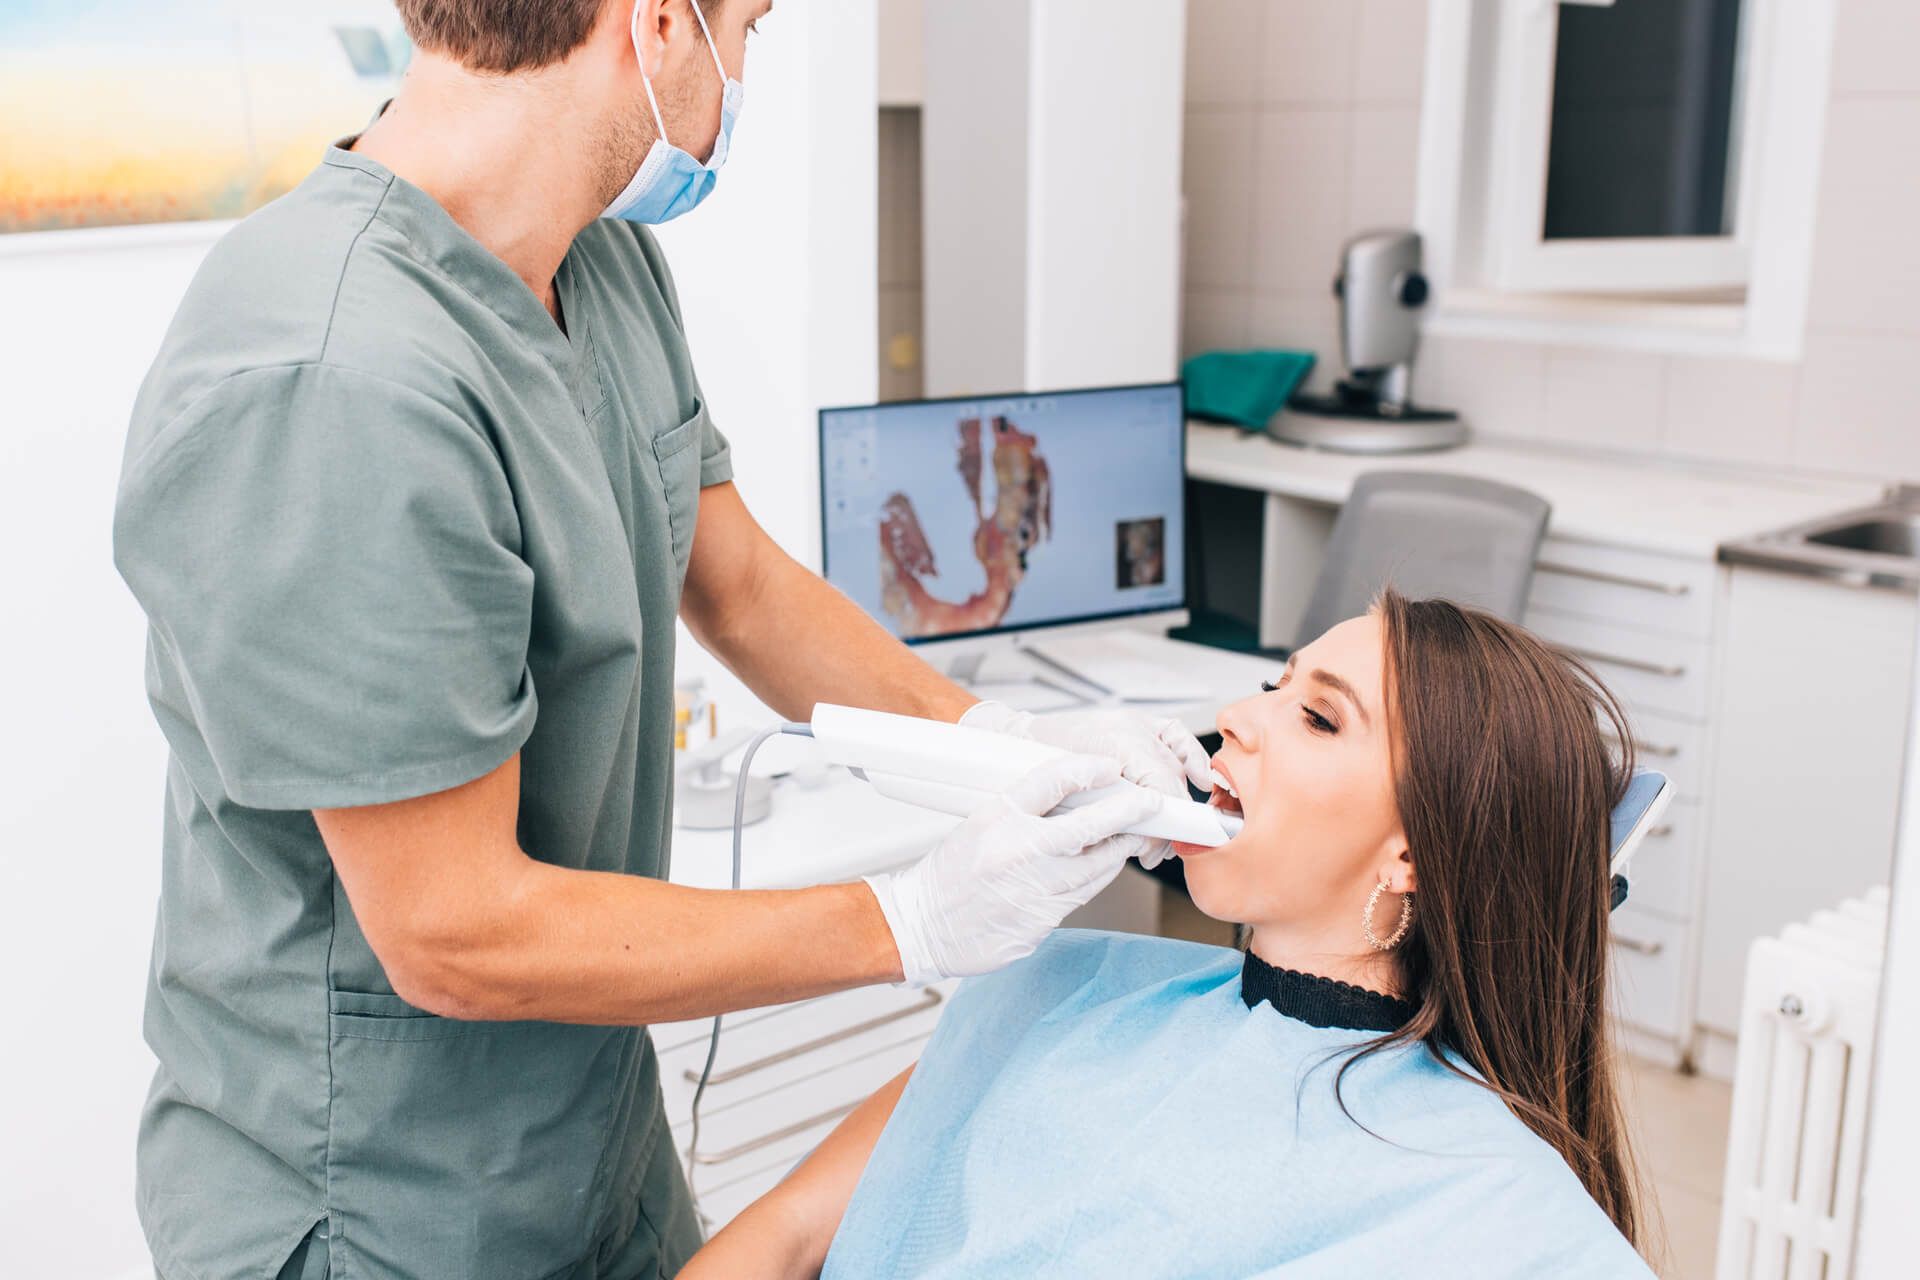 The dentist scans the patient's teeth with a 3d scanner